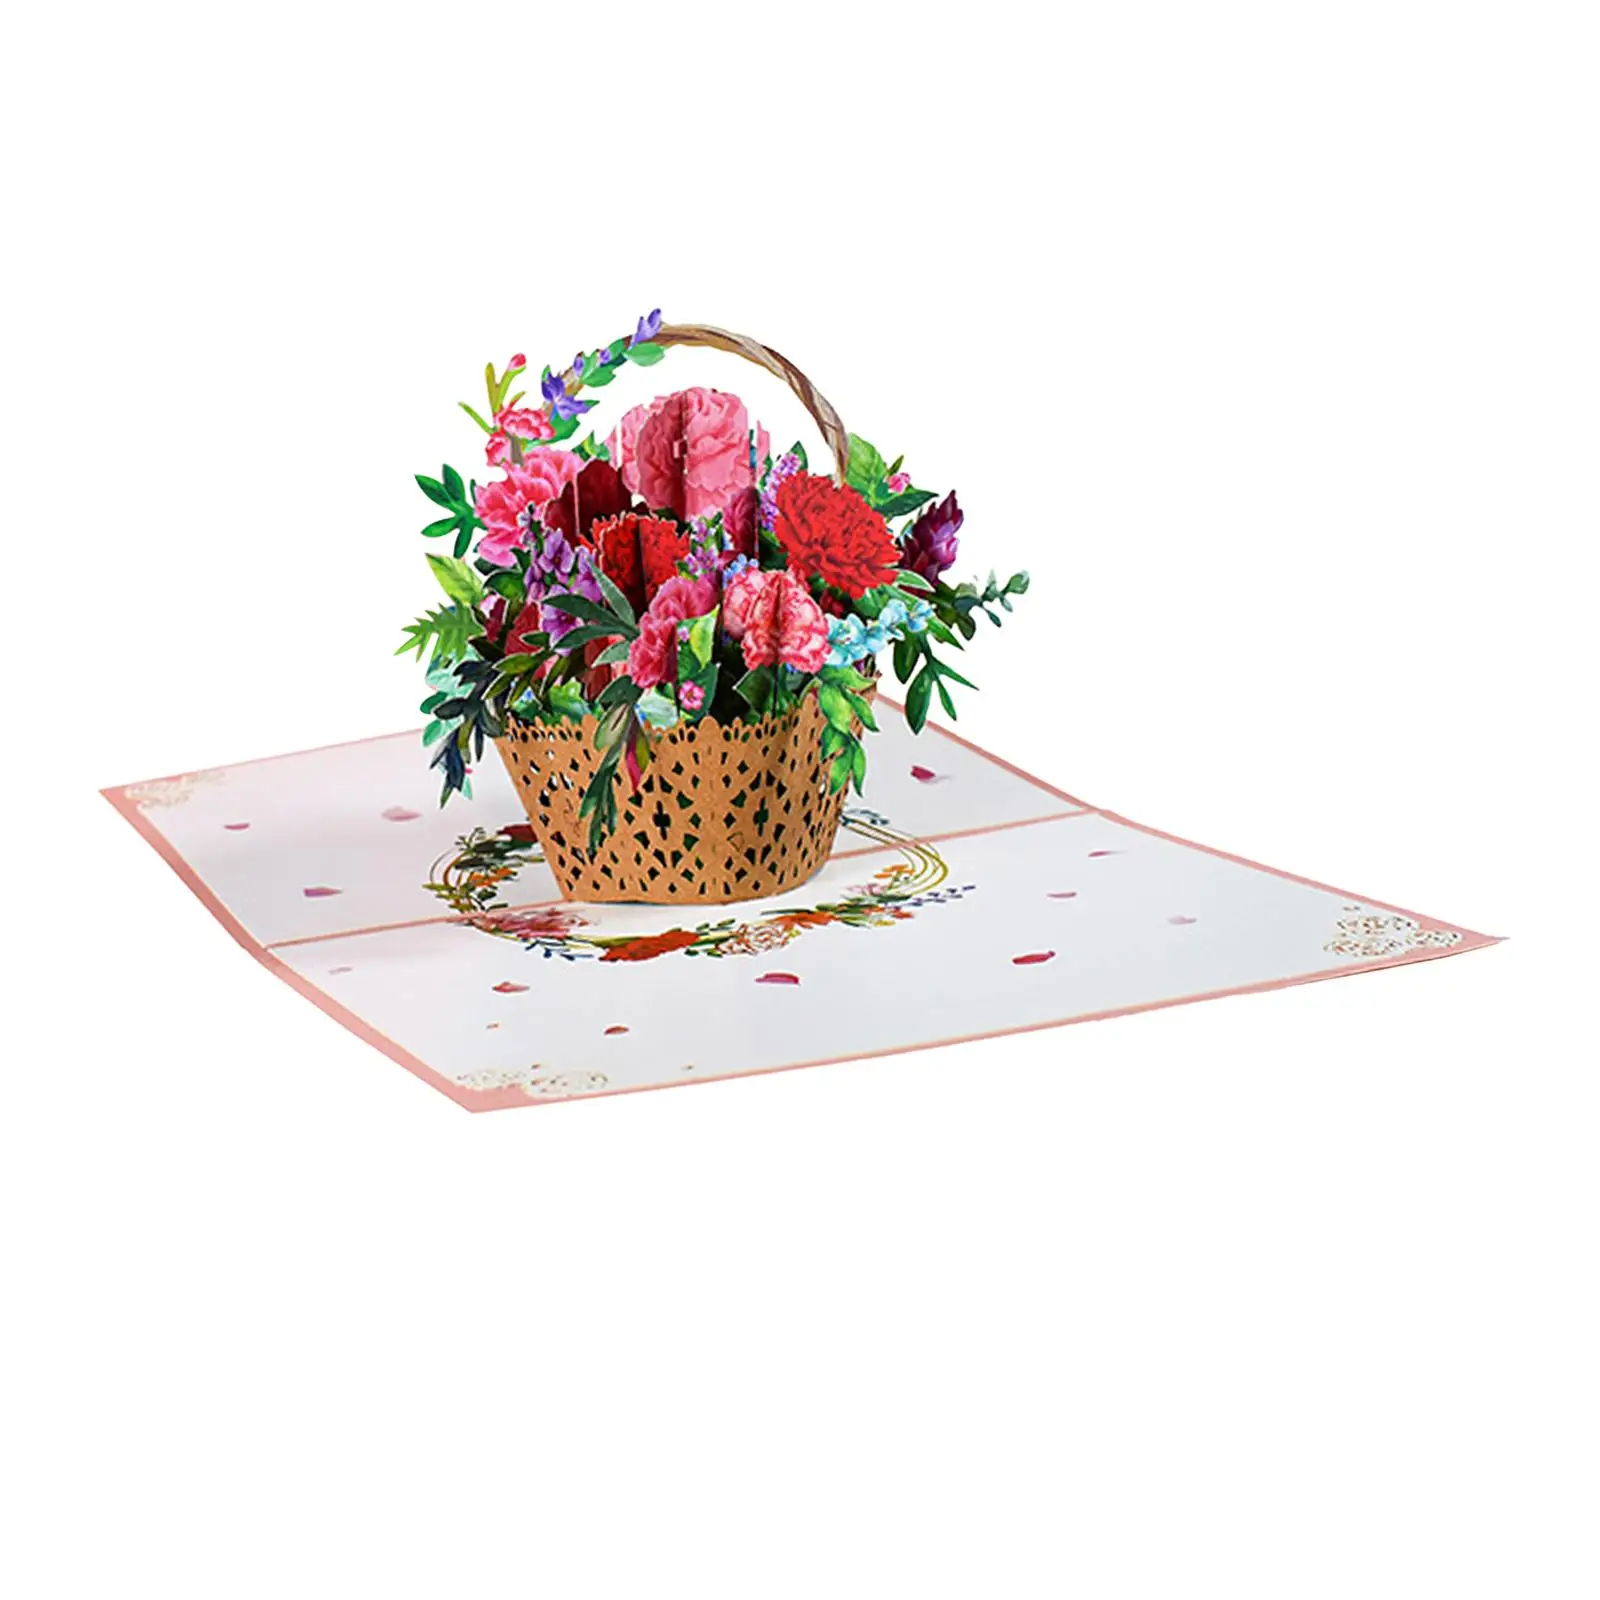 3D Greeting Cards with Note Card Creative Popup Greeting Card for Thinking You Wedding Birthday Party Favors Mother`s Day